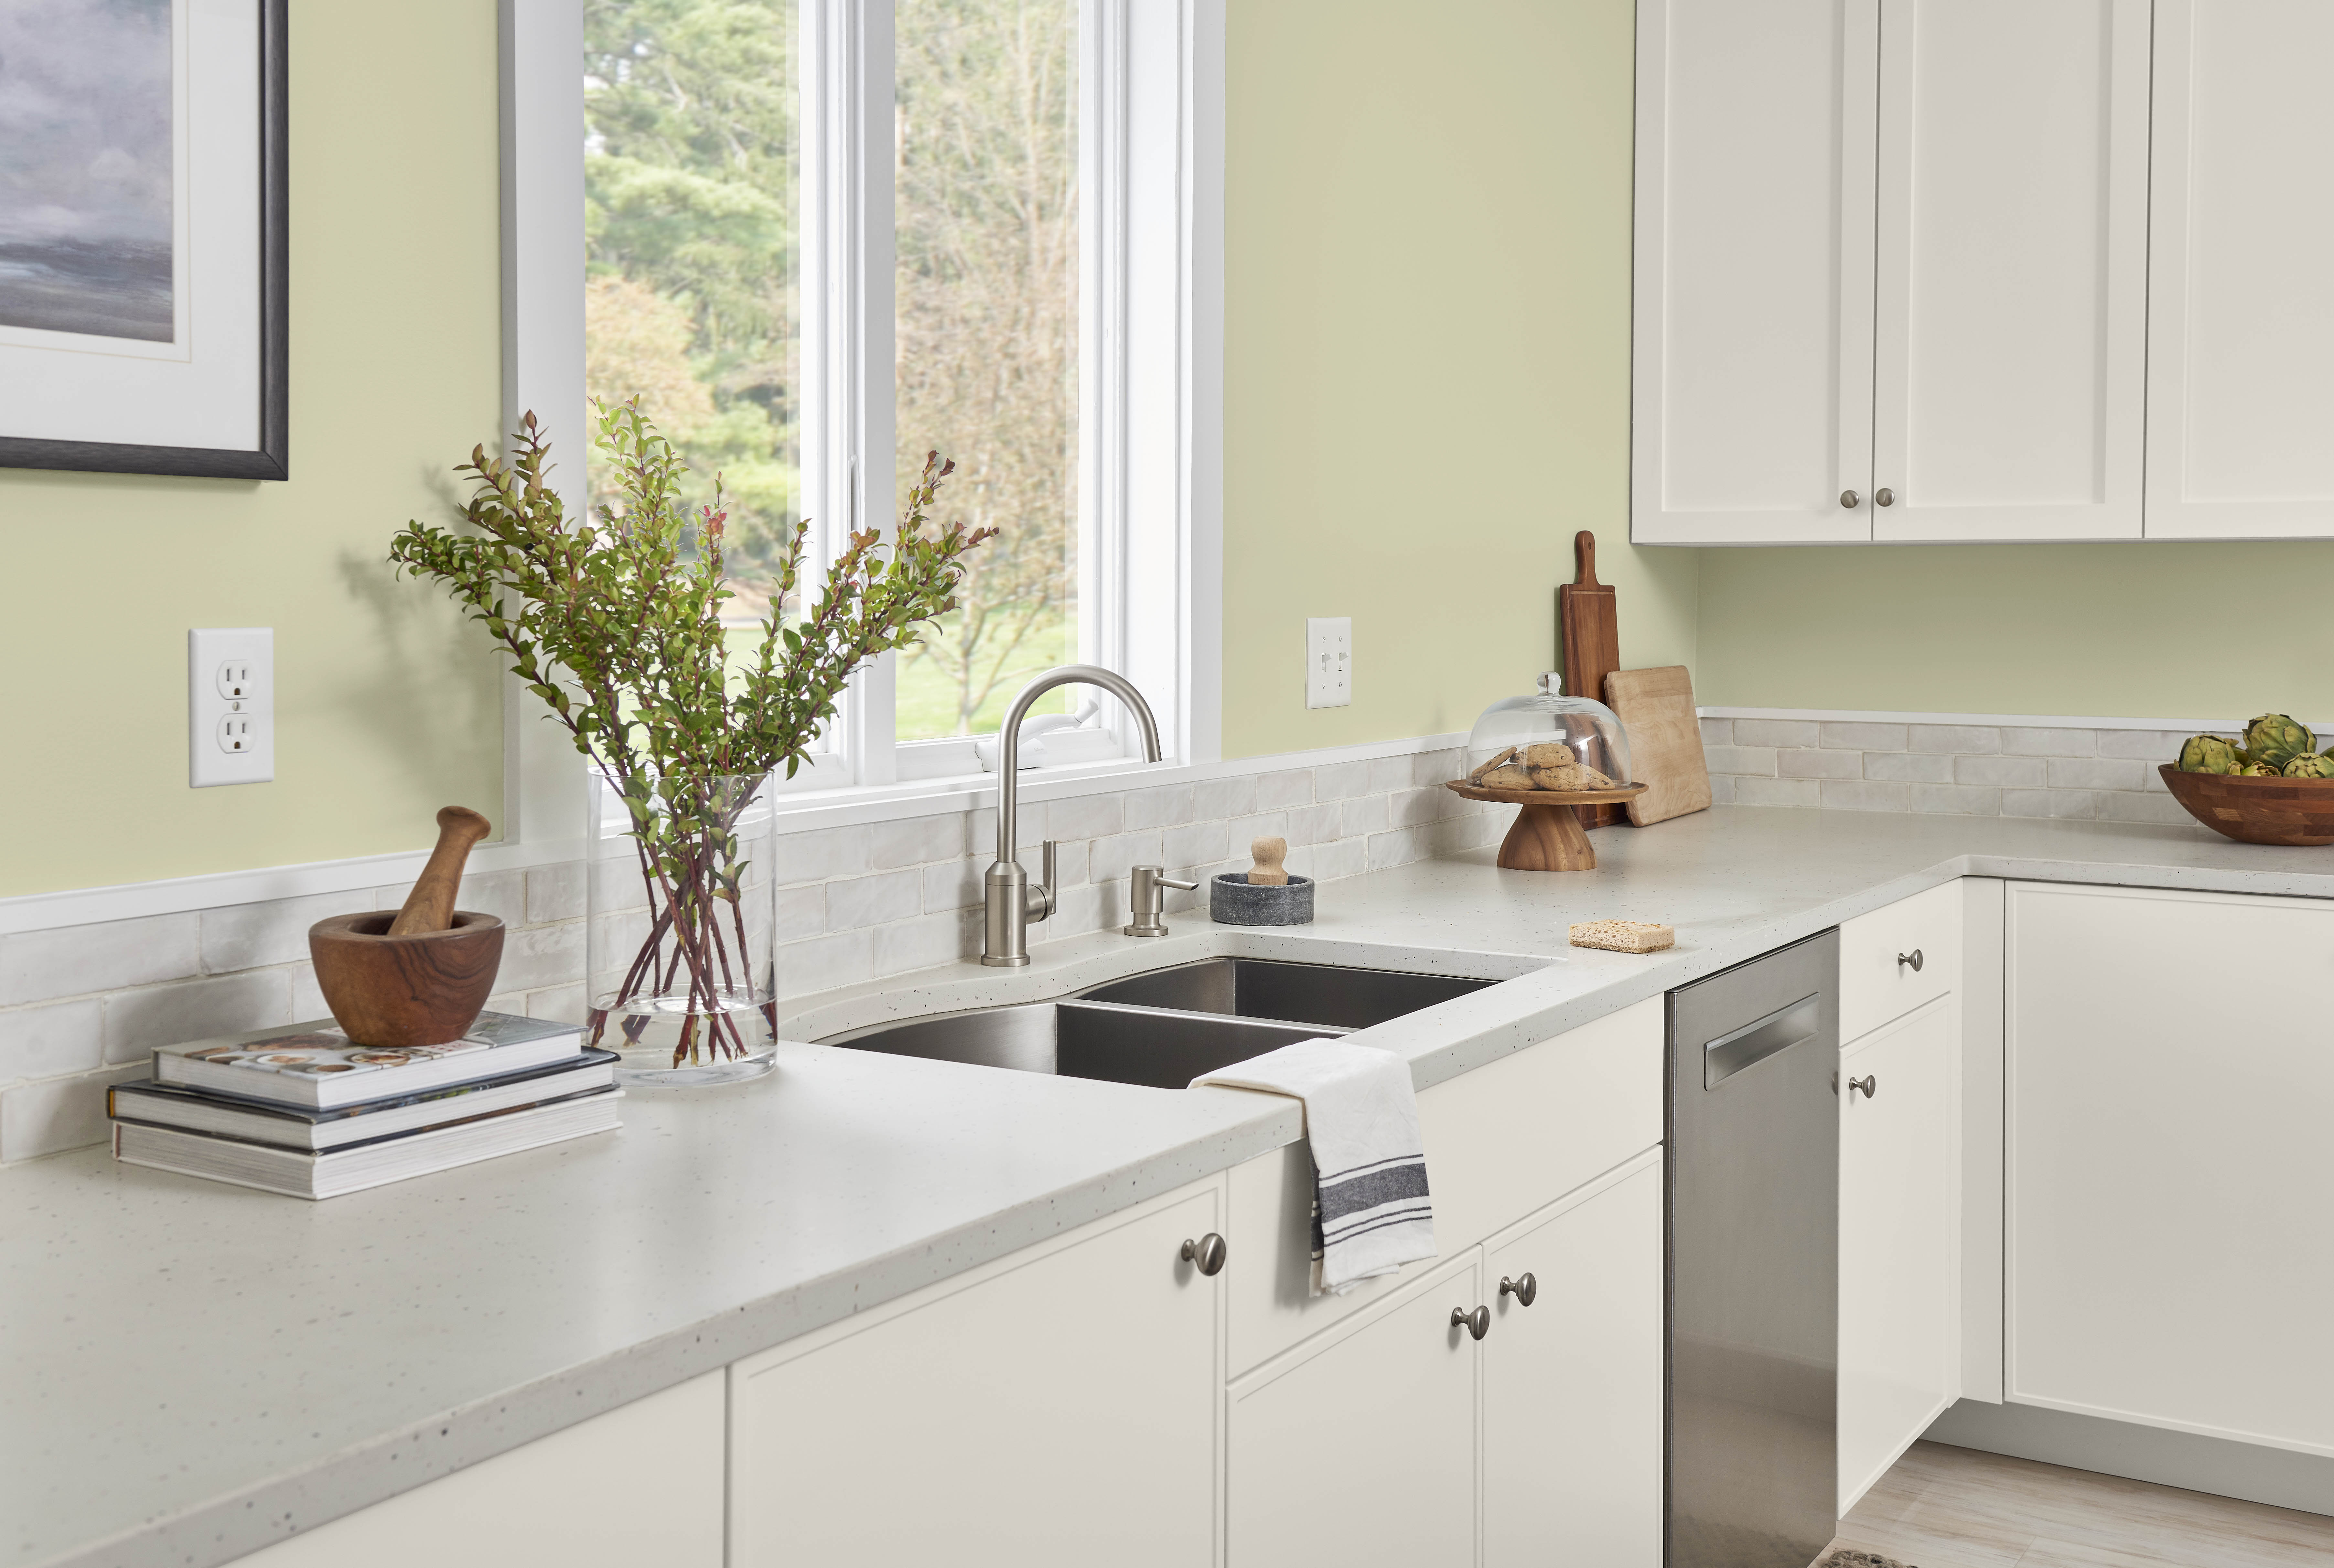 A bright and cheerful kitchen with walls in the colour Hybrid and cabinets in the colour Smoky White